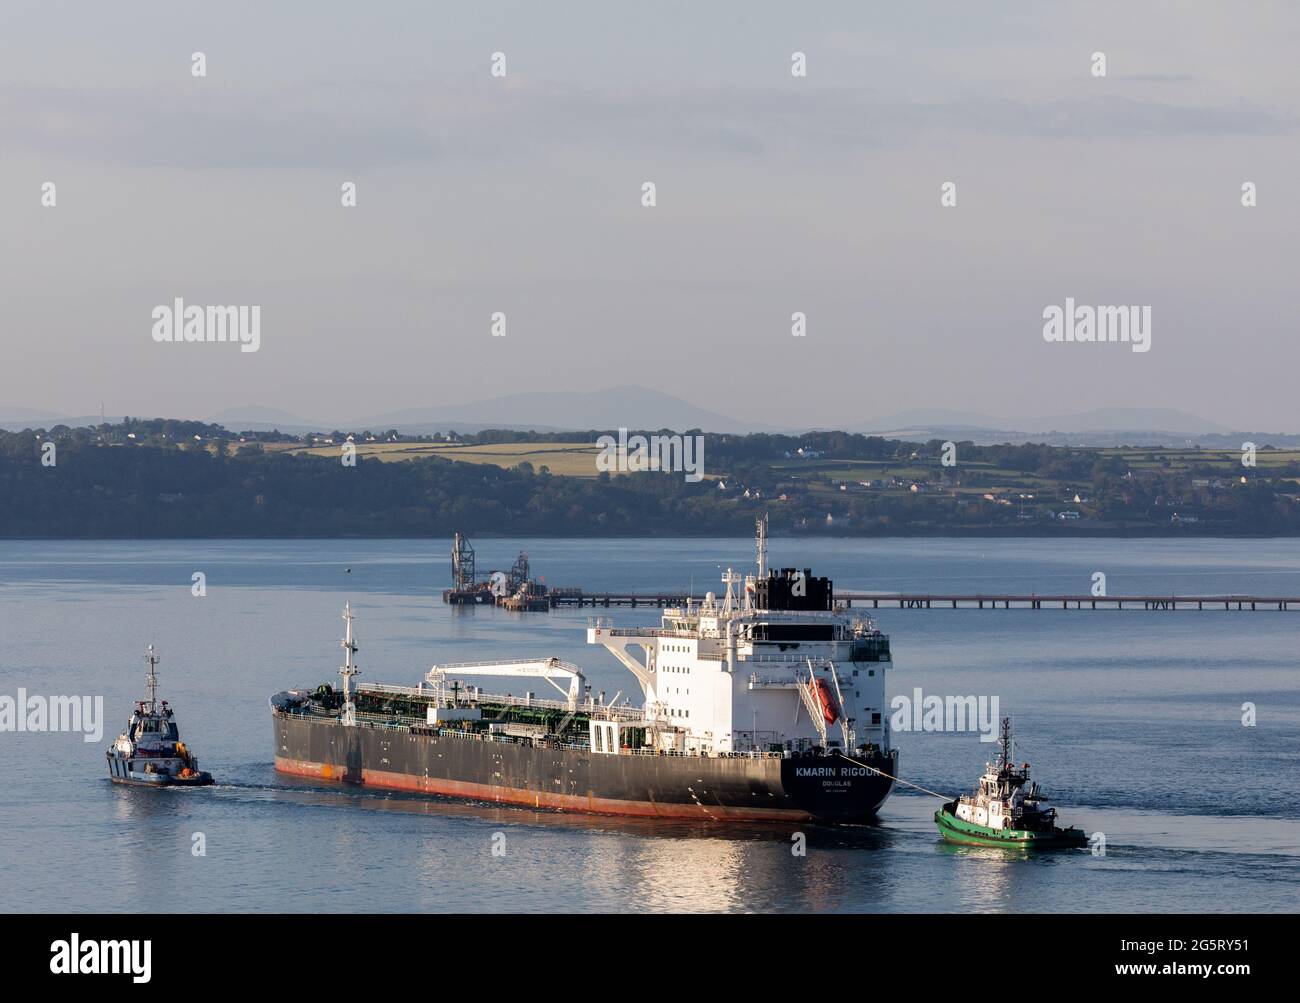 Cork Harbour, Cork, Ireland. 29th June, 2021. Oil tanker Kmarin Rigour steams through Cork Harbour escorted by tugs Ocean Challanger and DSG Titan after a voyage from Corpus Christi Texas with a supply of crude for the refinery at Whitegate, Co. Cork, Ireland. - Picture; David Creedon / Alamy Live News Stock Photo